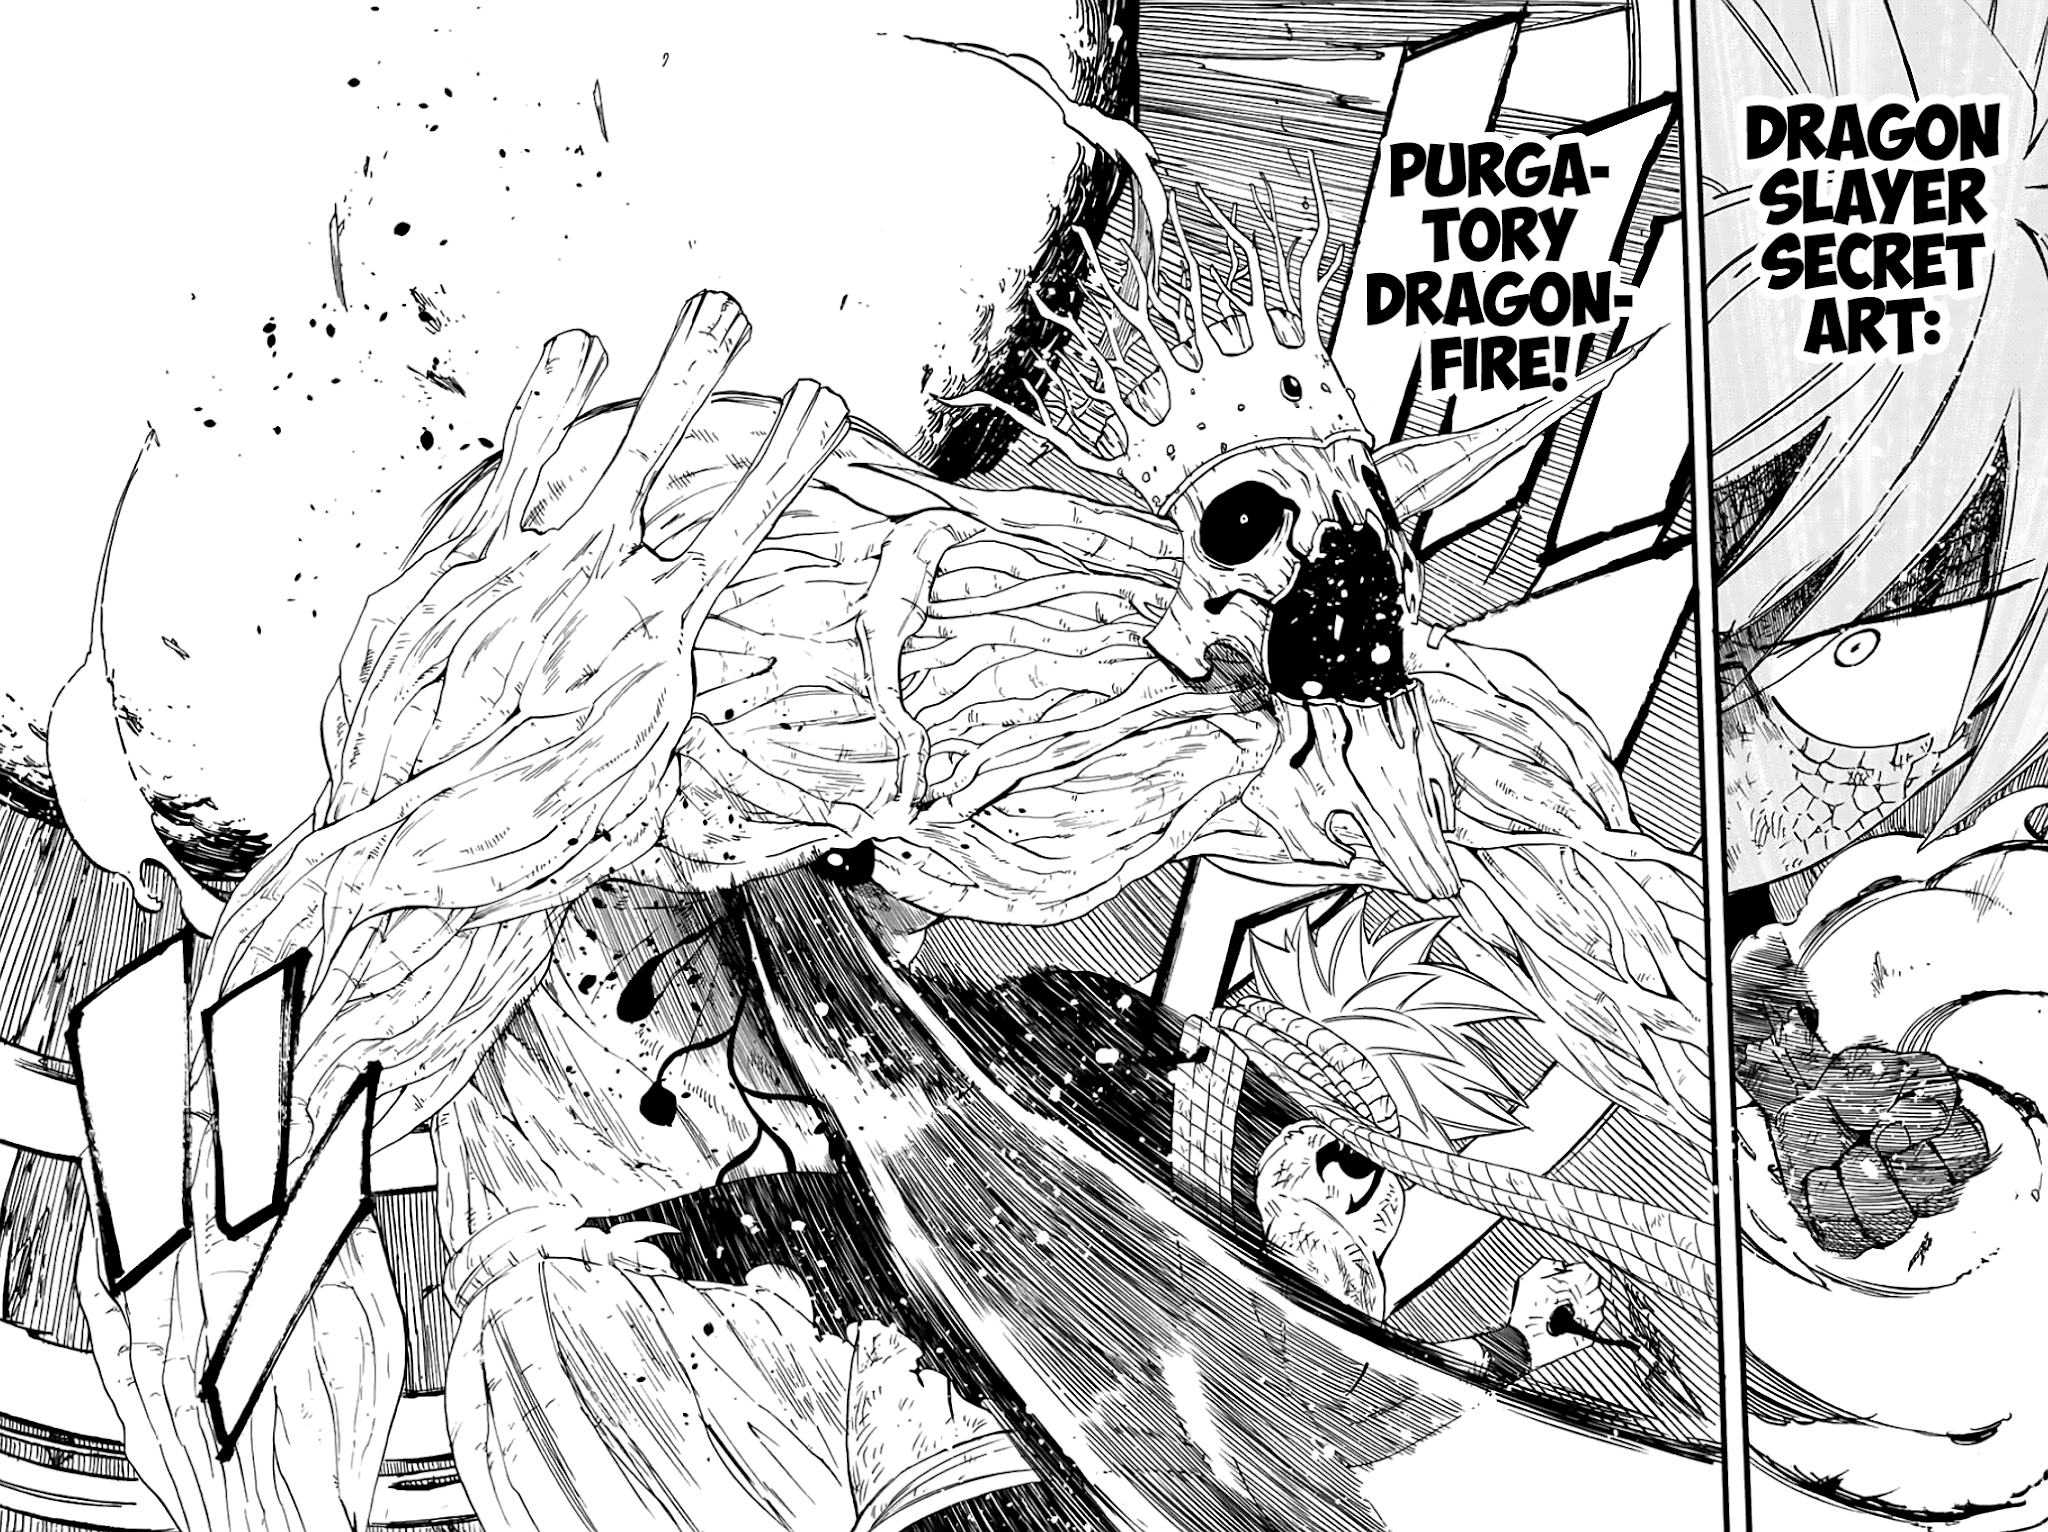 Natsu was the first one how used dragon force!